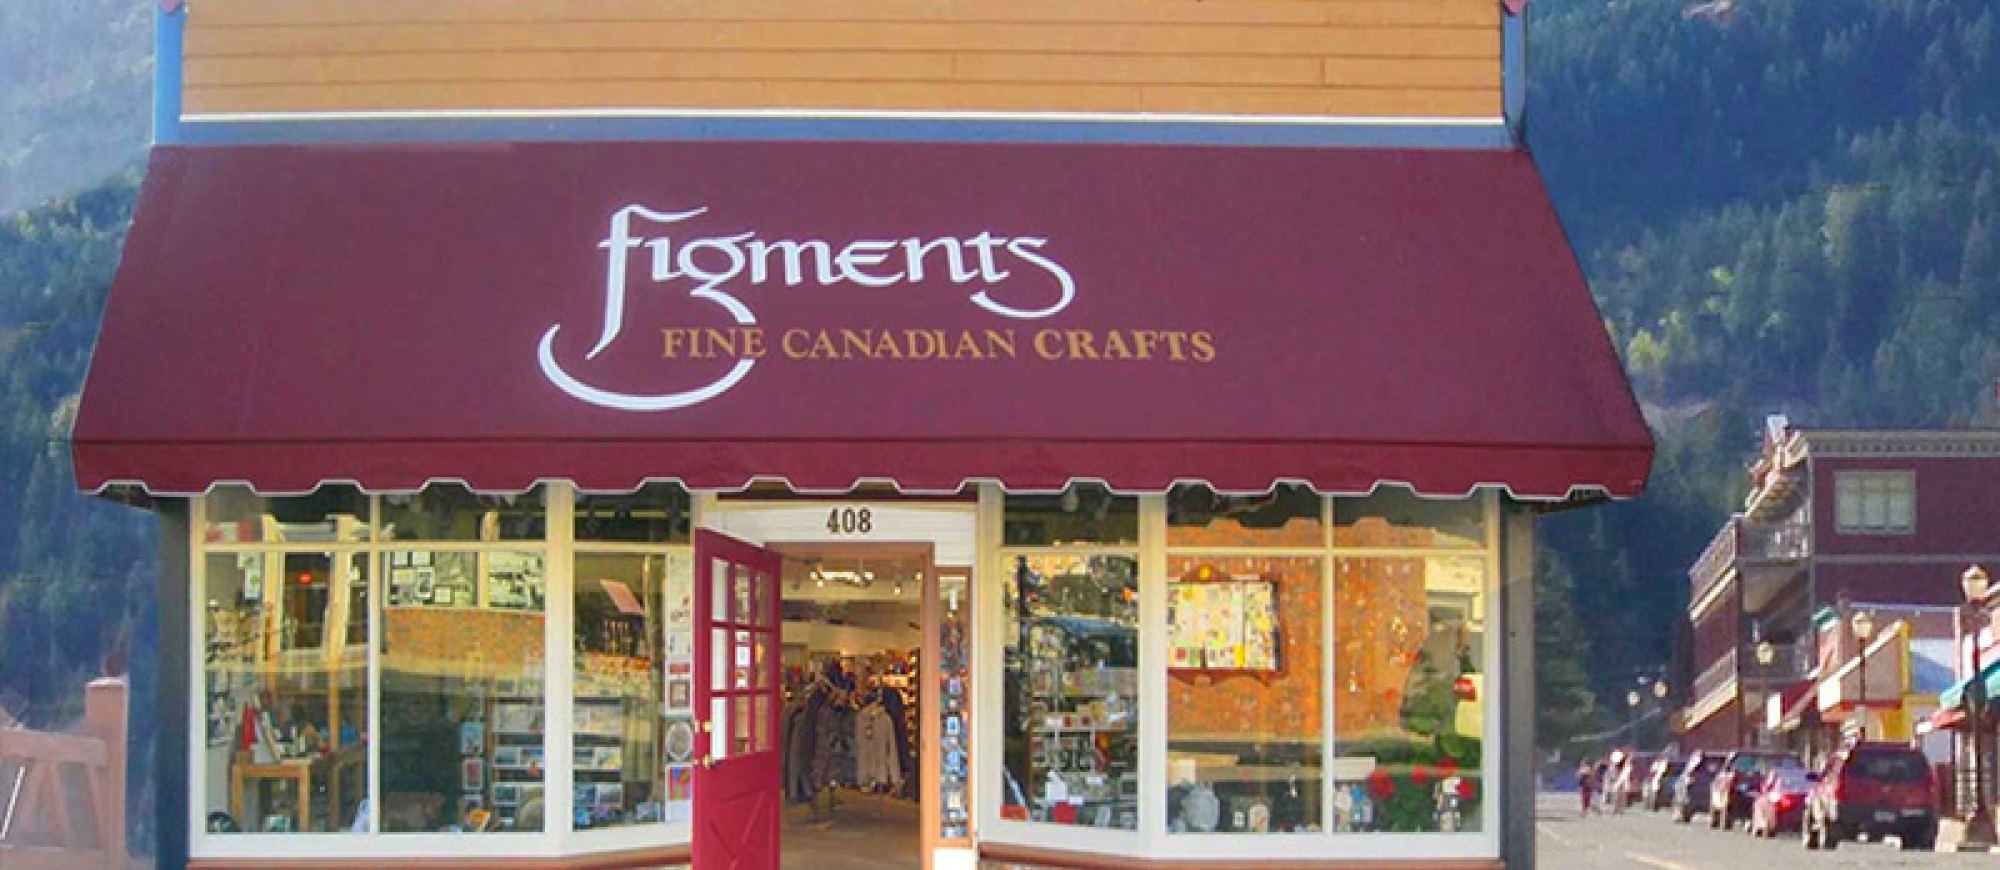 Figments Fine Canadian Crafts